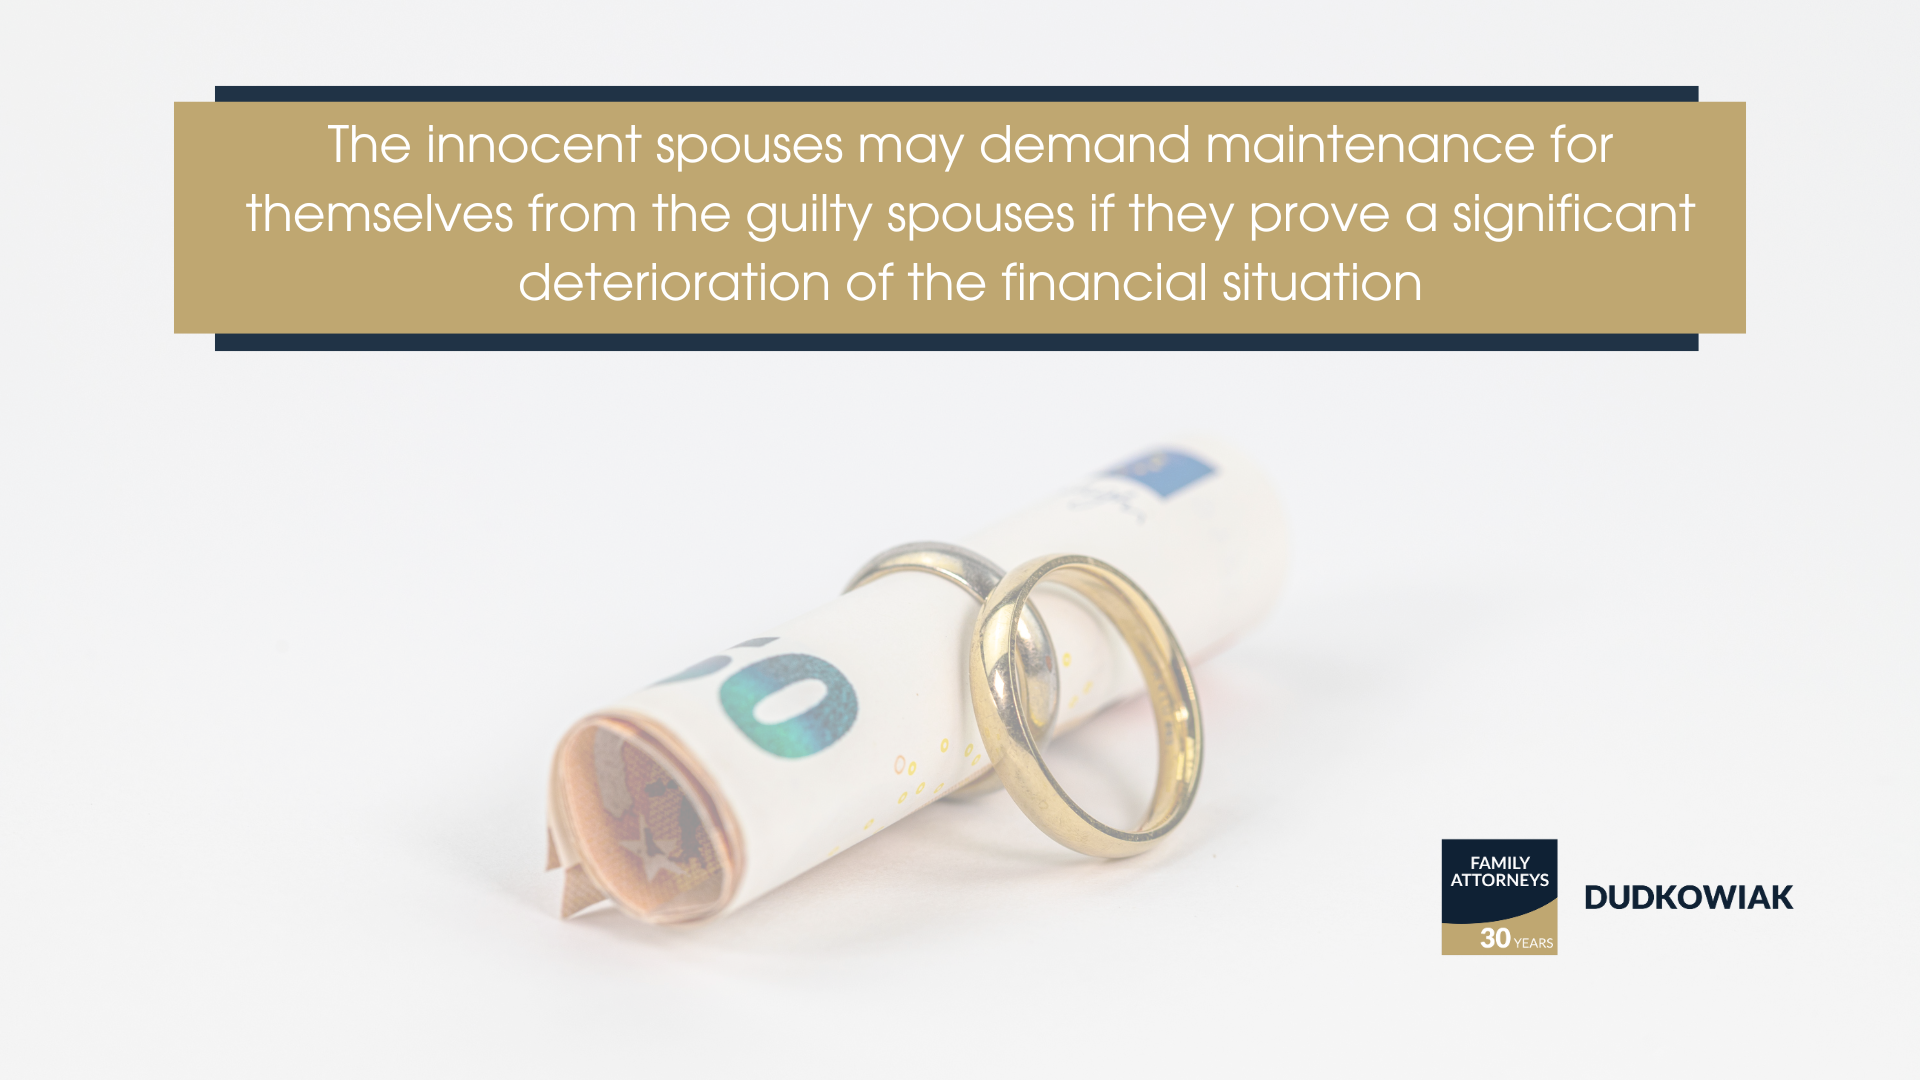 The innocent spouses may demand maintenance for themselves from the guilty spouses if they prove a significant deterioration of the financial situation